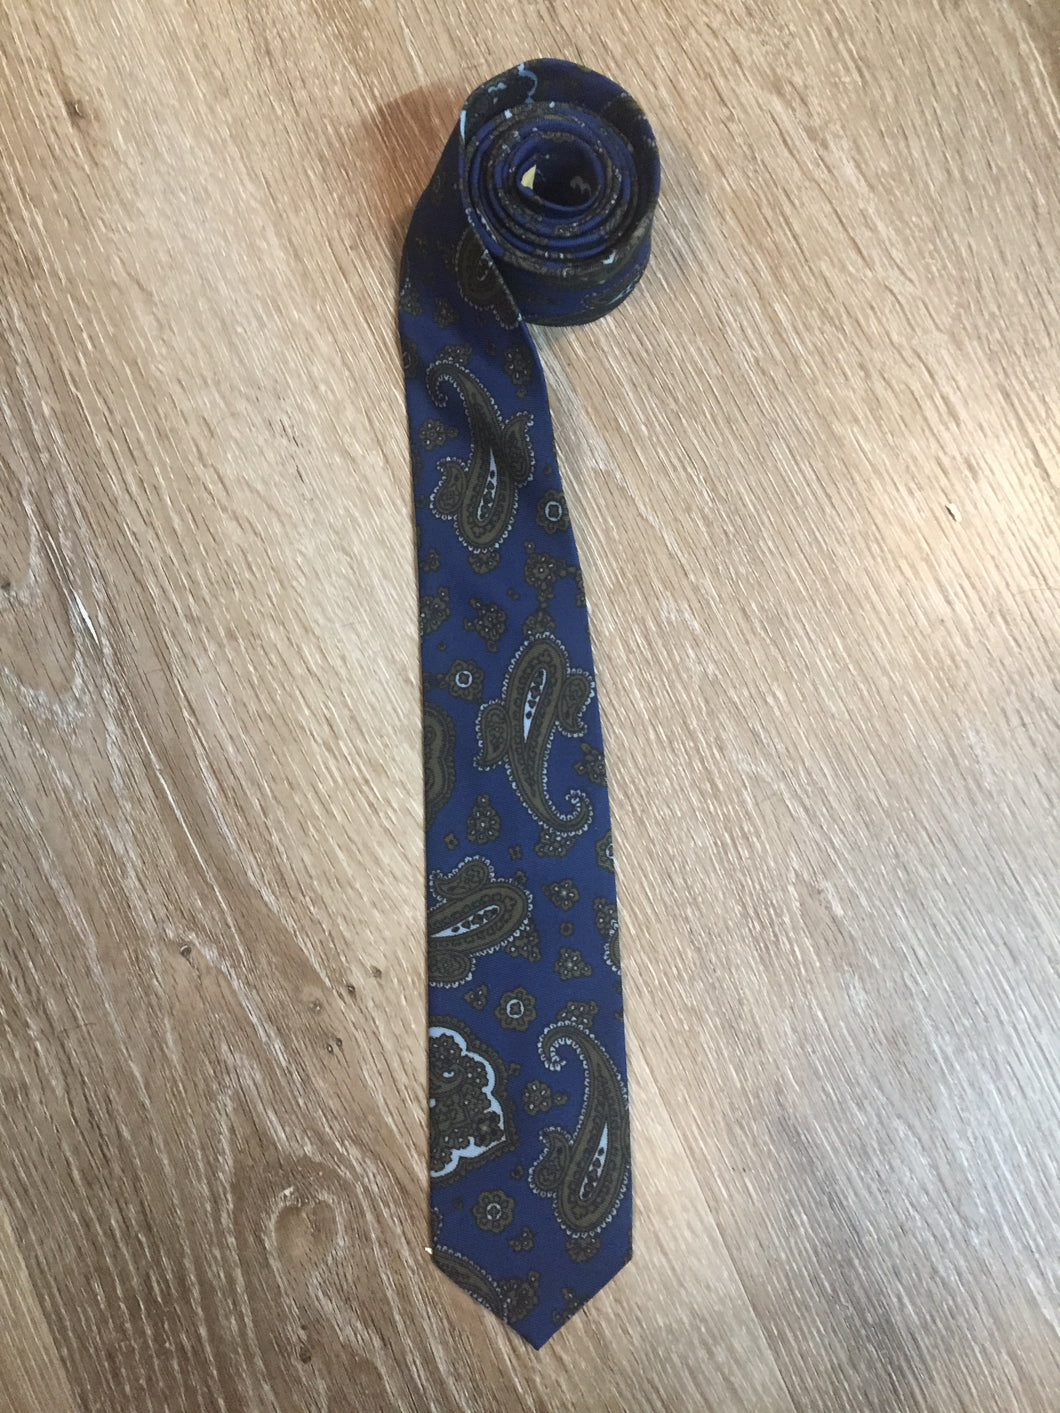 Kingspier Vintage - Abbey 100% polyester tie with blue and green paisley design.

Length: 52” 
Width: 2.25” 

This tie is in excellent condition.